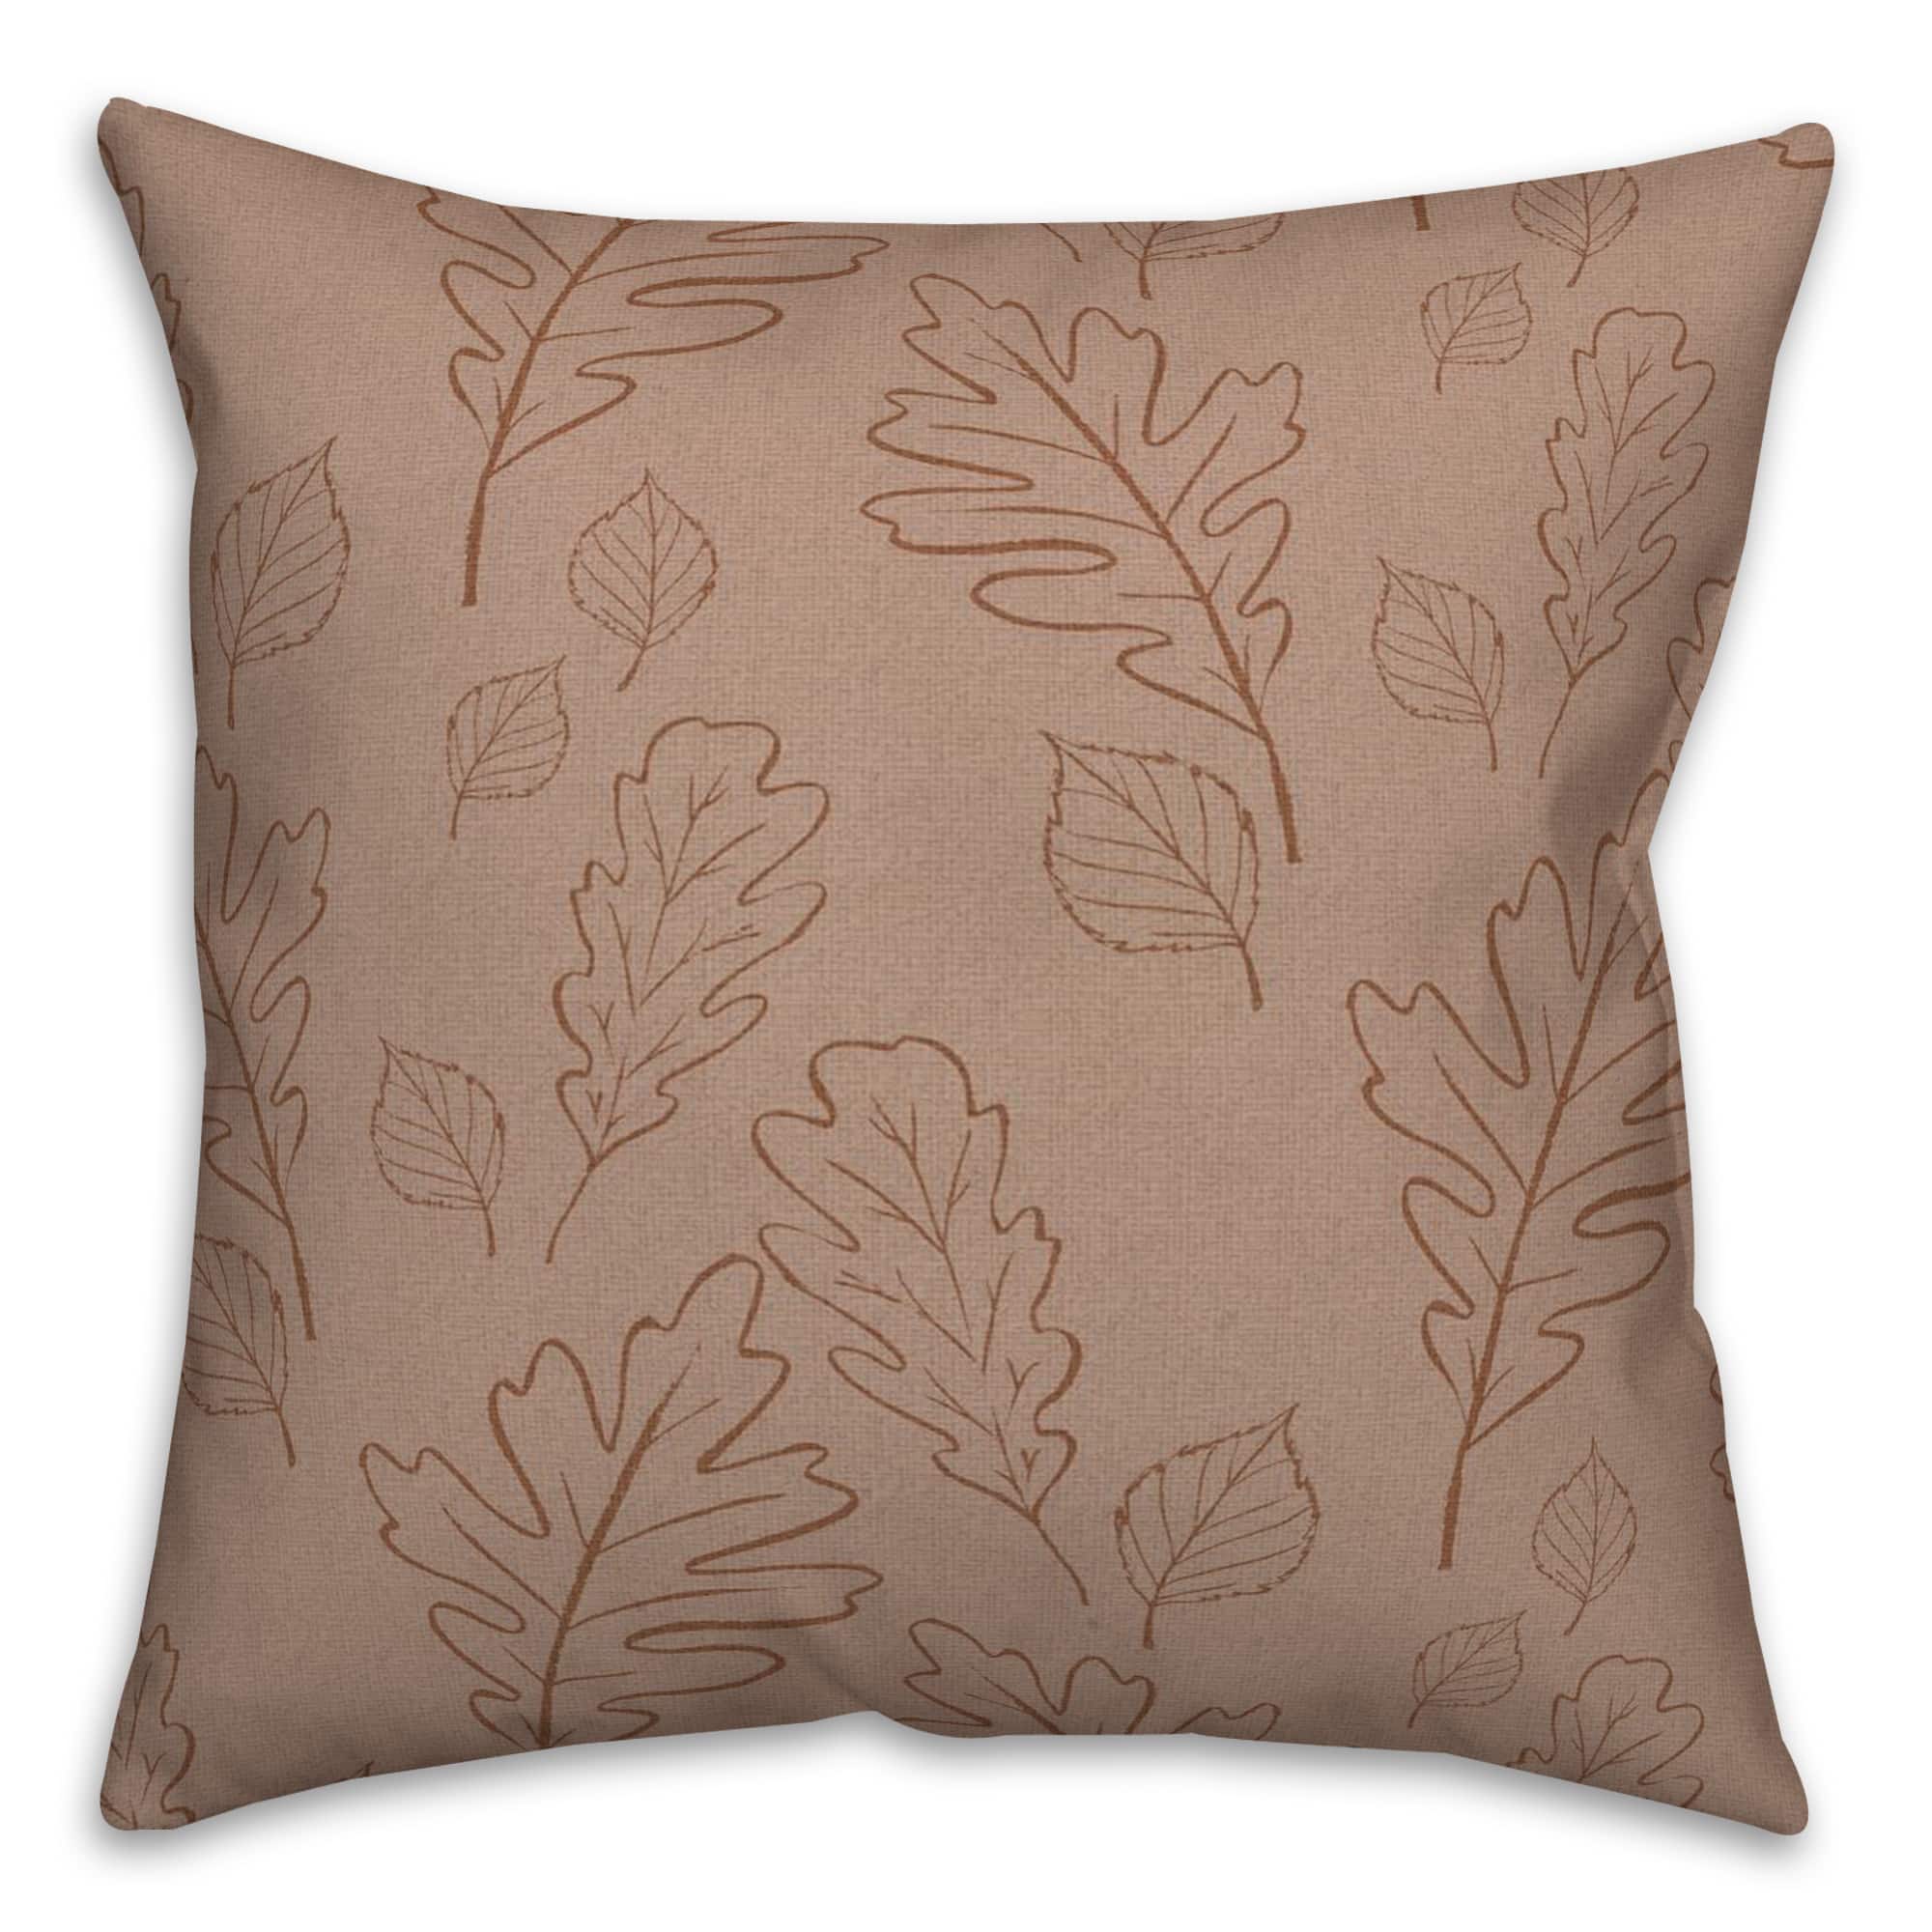 Dusty Rose Large Leaf Pattern Throw Pillow